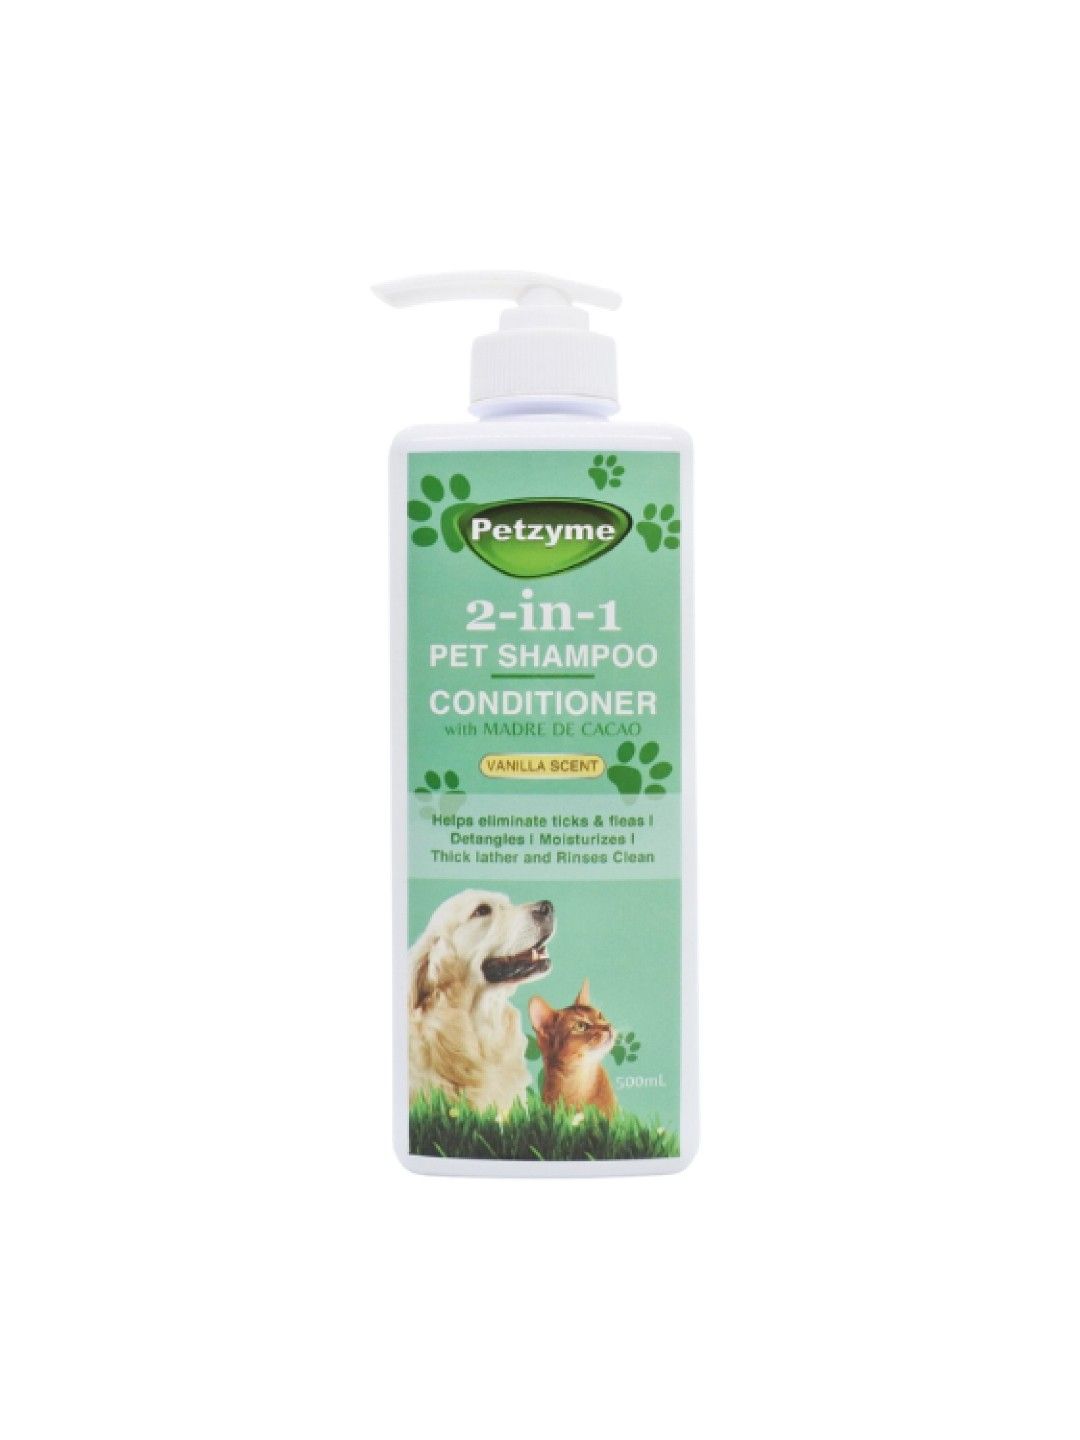 Petzyme 2 in 1 Shampoo and Conditioner (500ml)